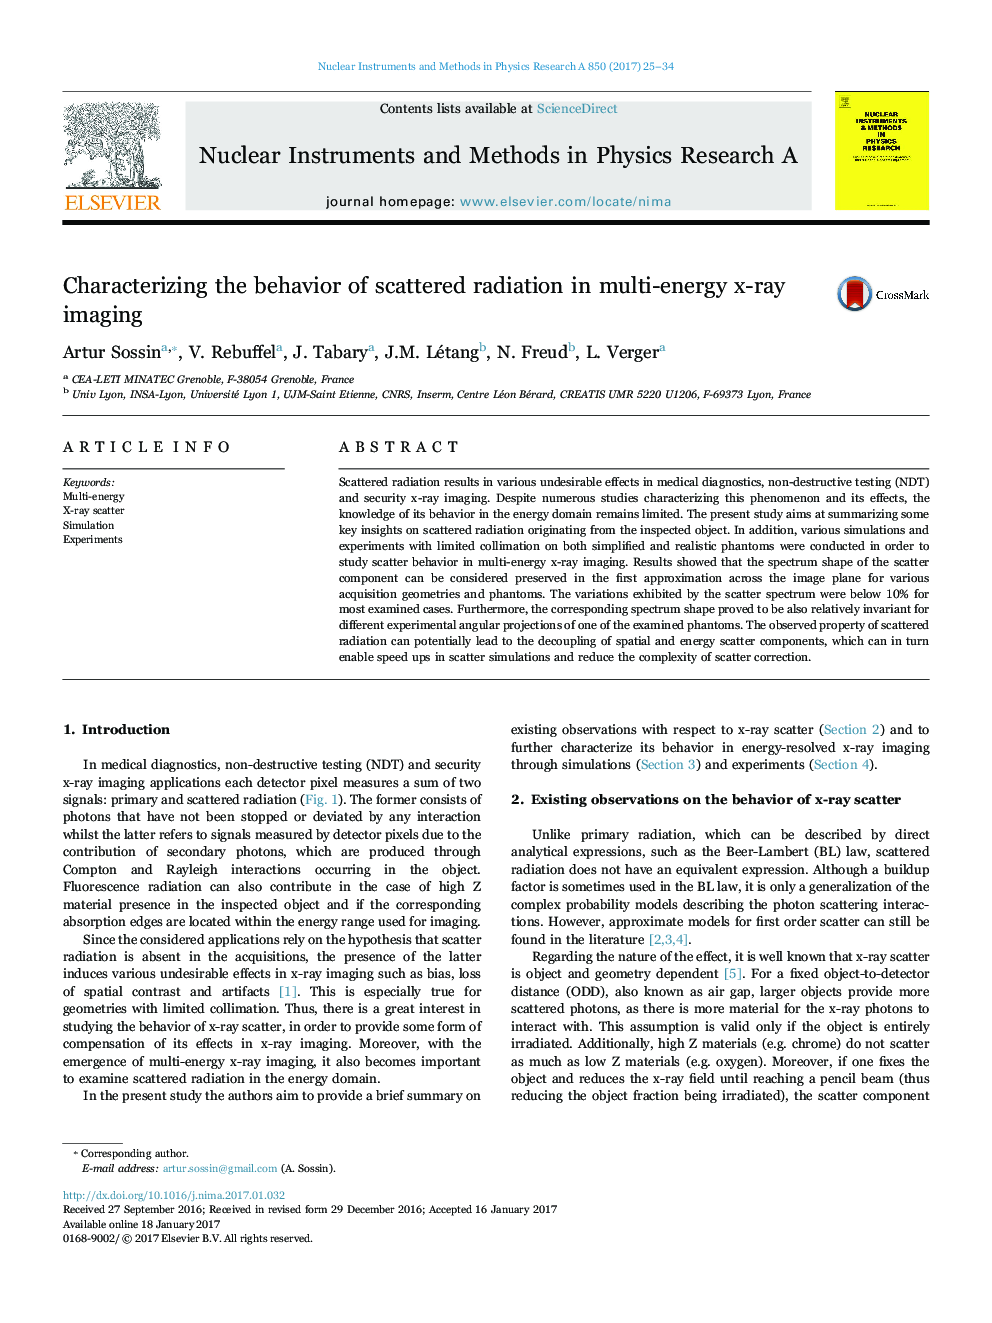 Characterizing the behavior of scattered radiation in multi-energy x-ray imaging